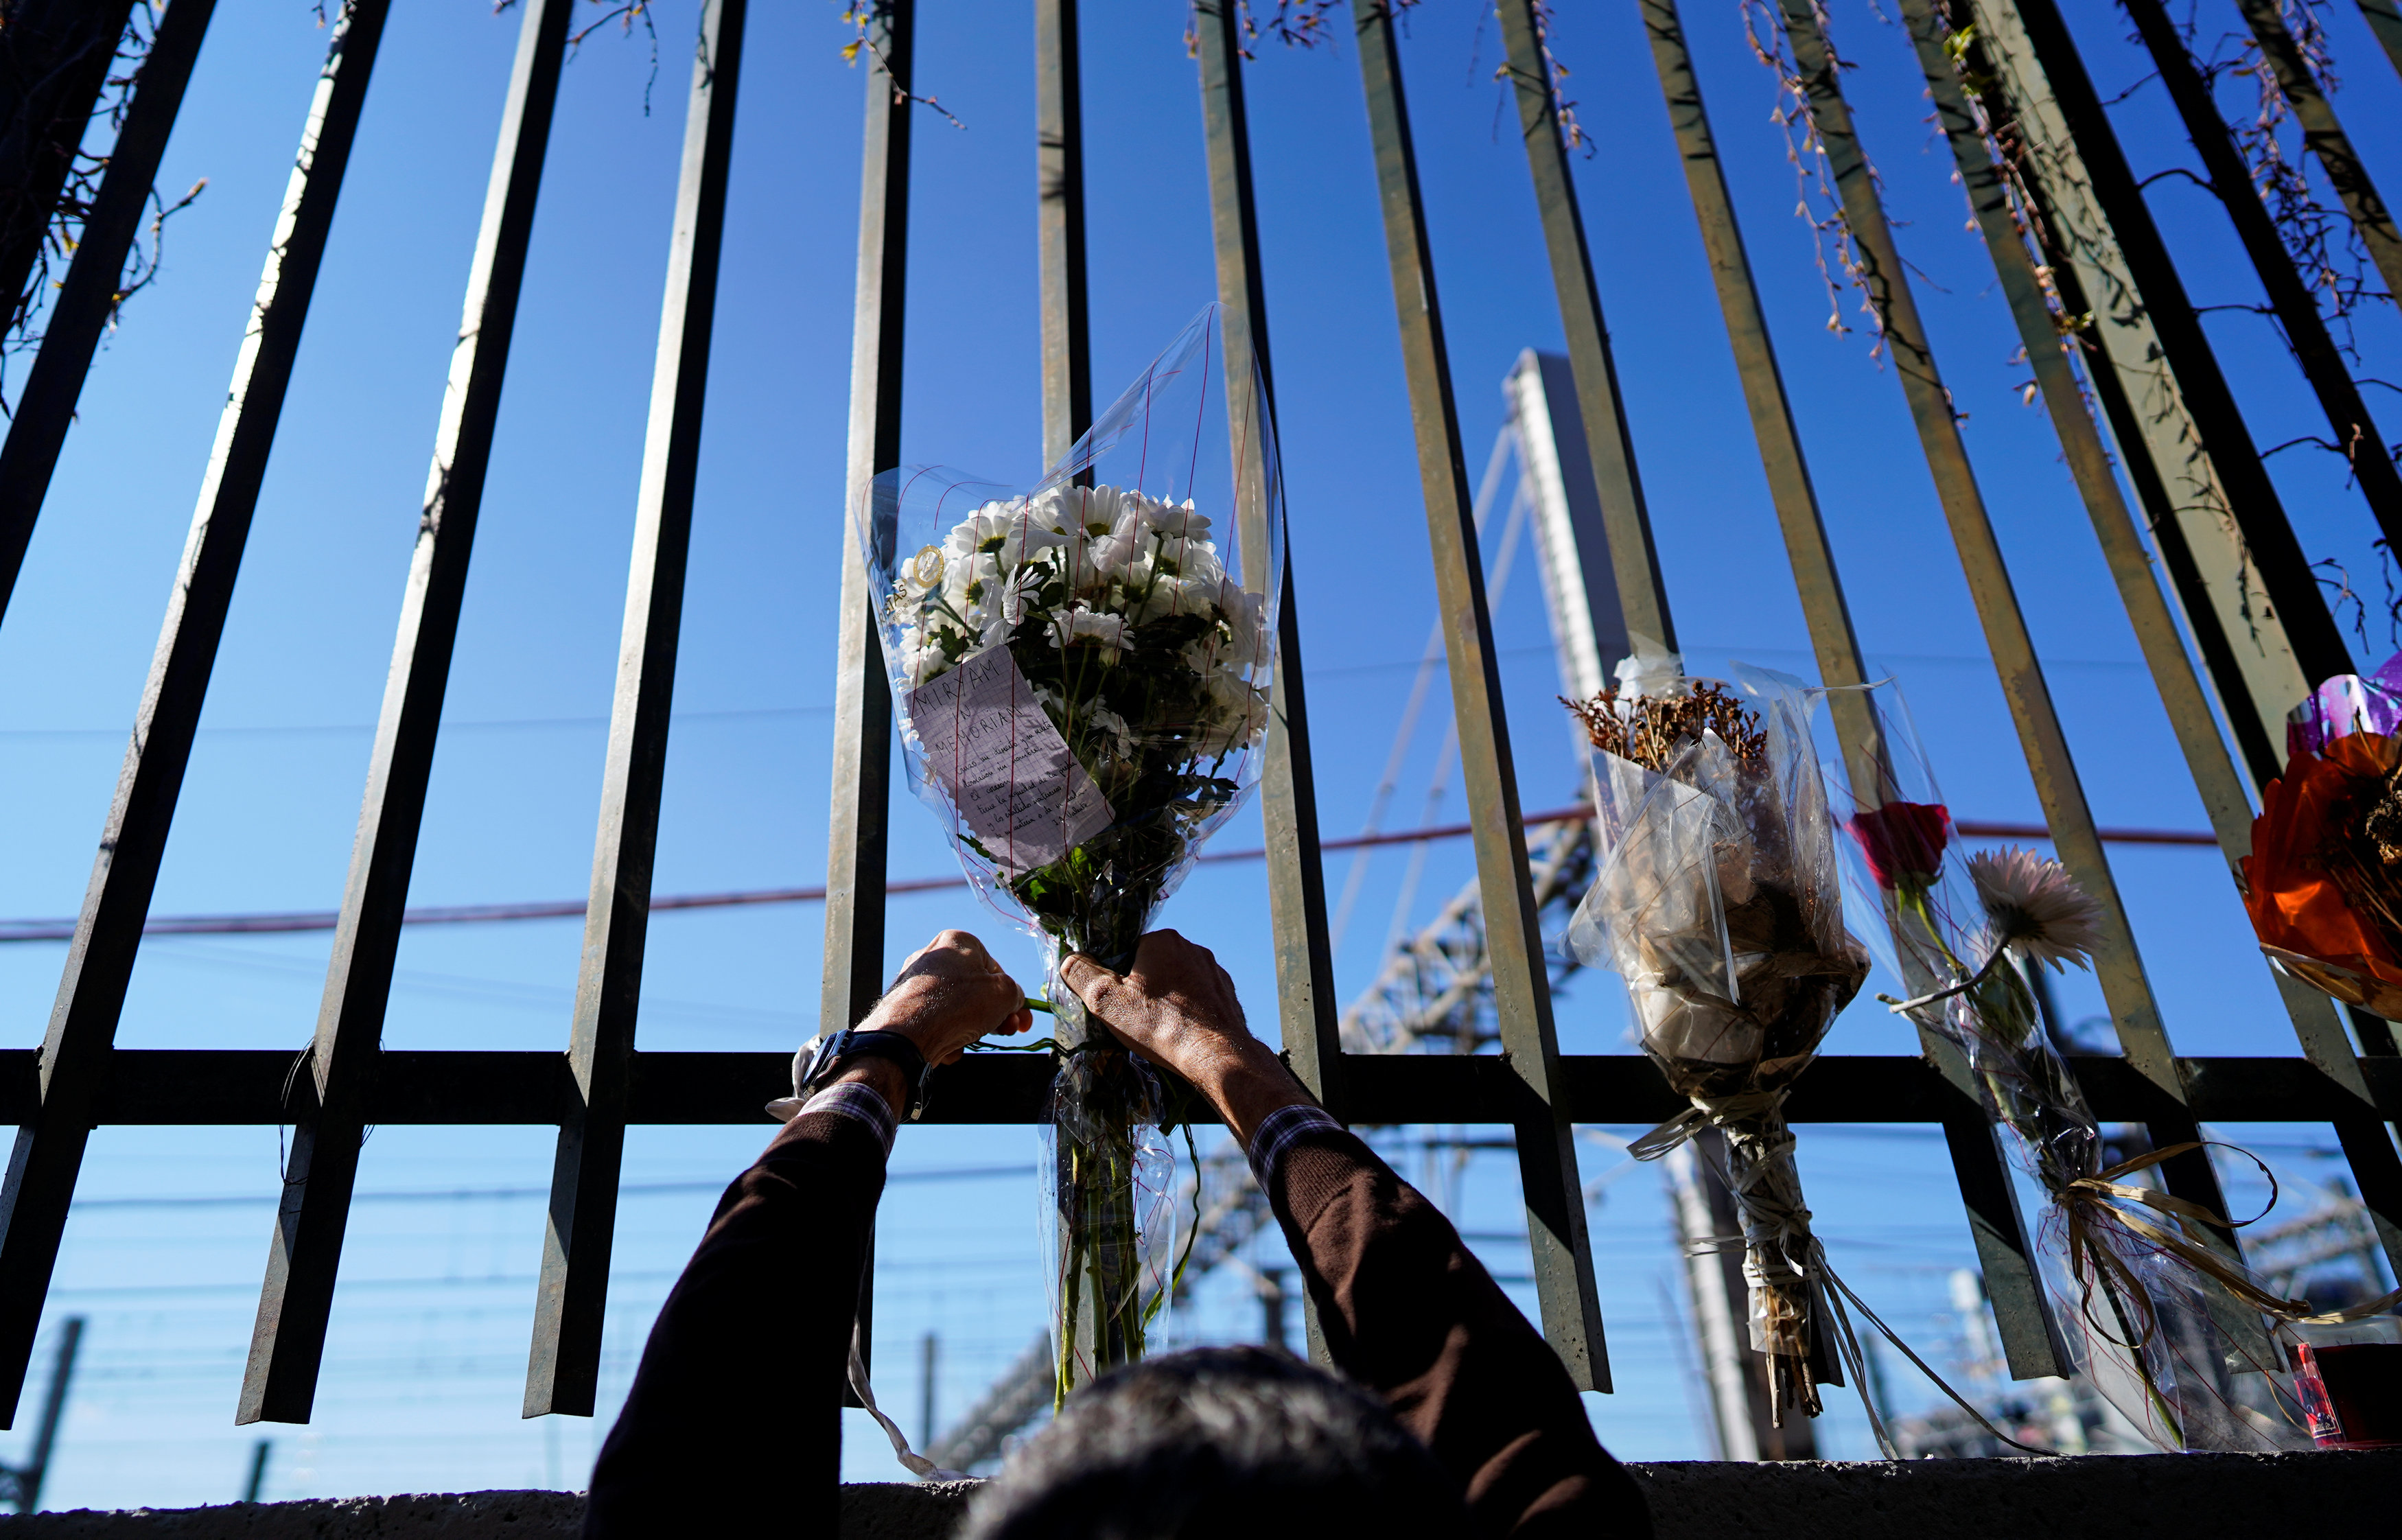 A relative of the Madrid train attacks victim, places flowers outside the Atocha station on the 15th anniversary of the attacks in Madrid (by REUTERS/Juan Medina)